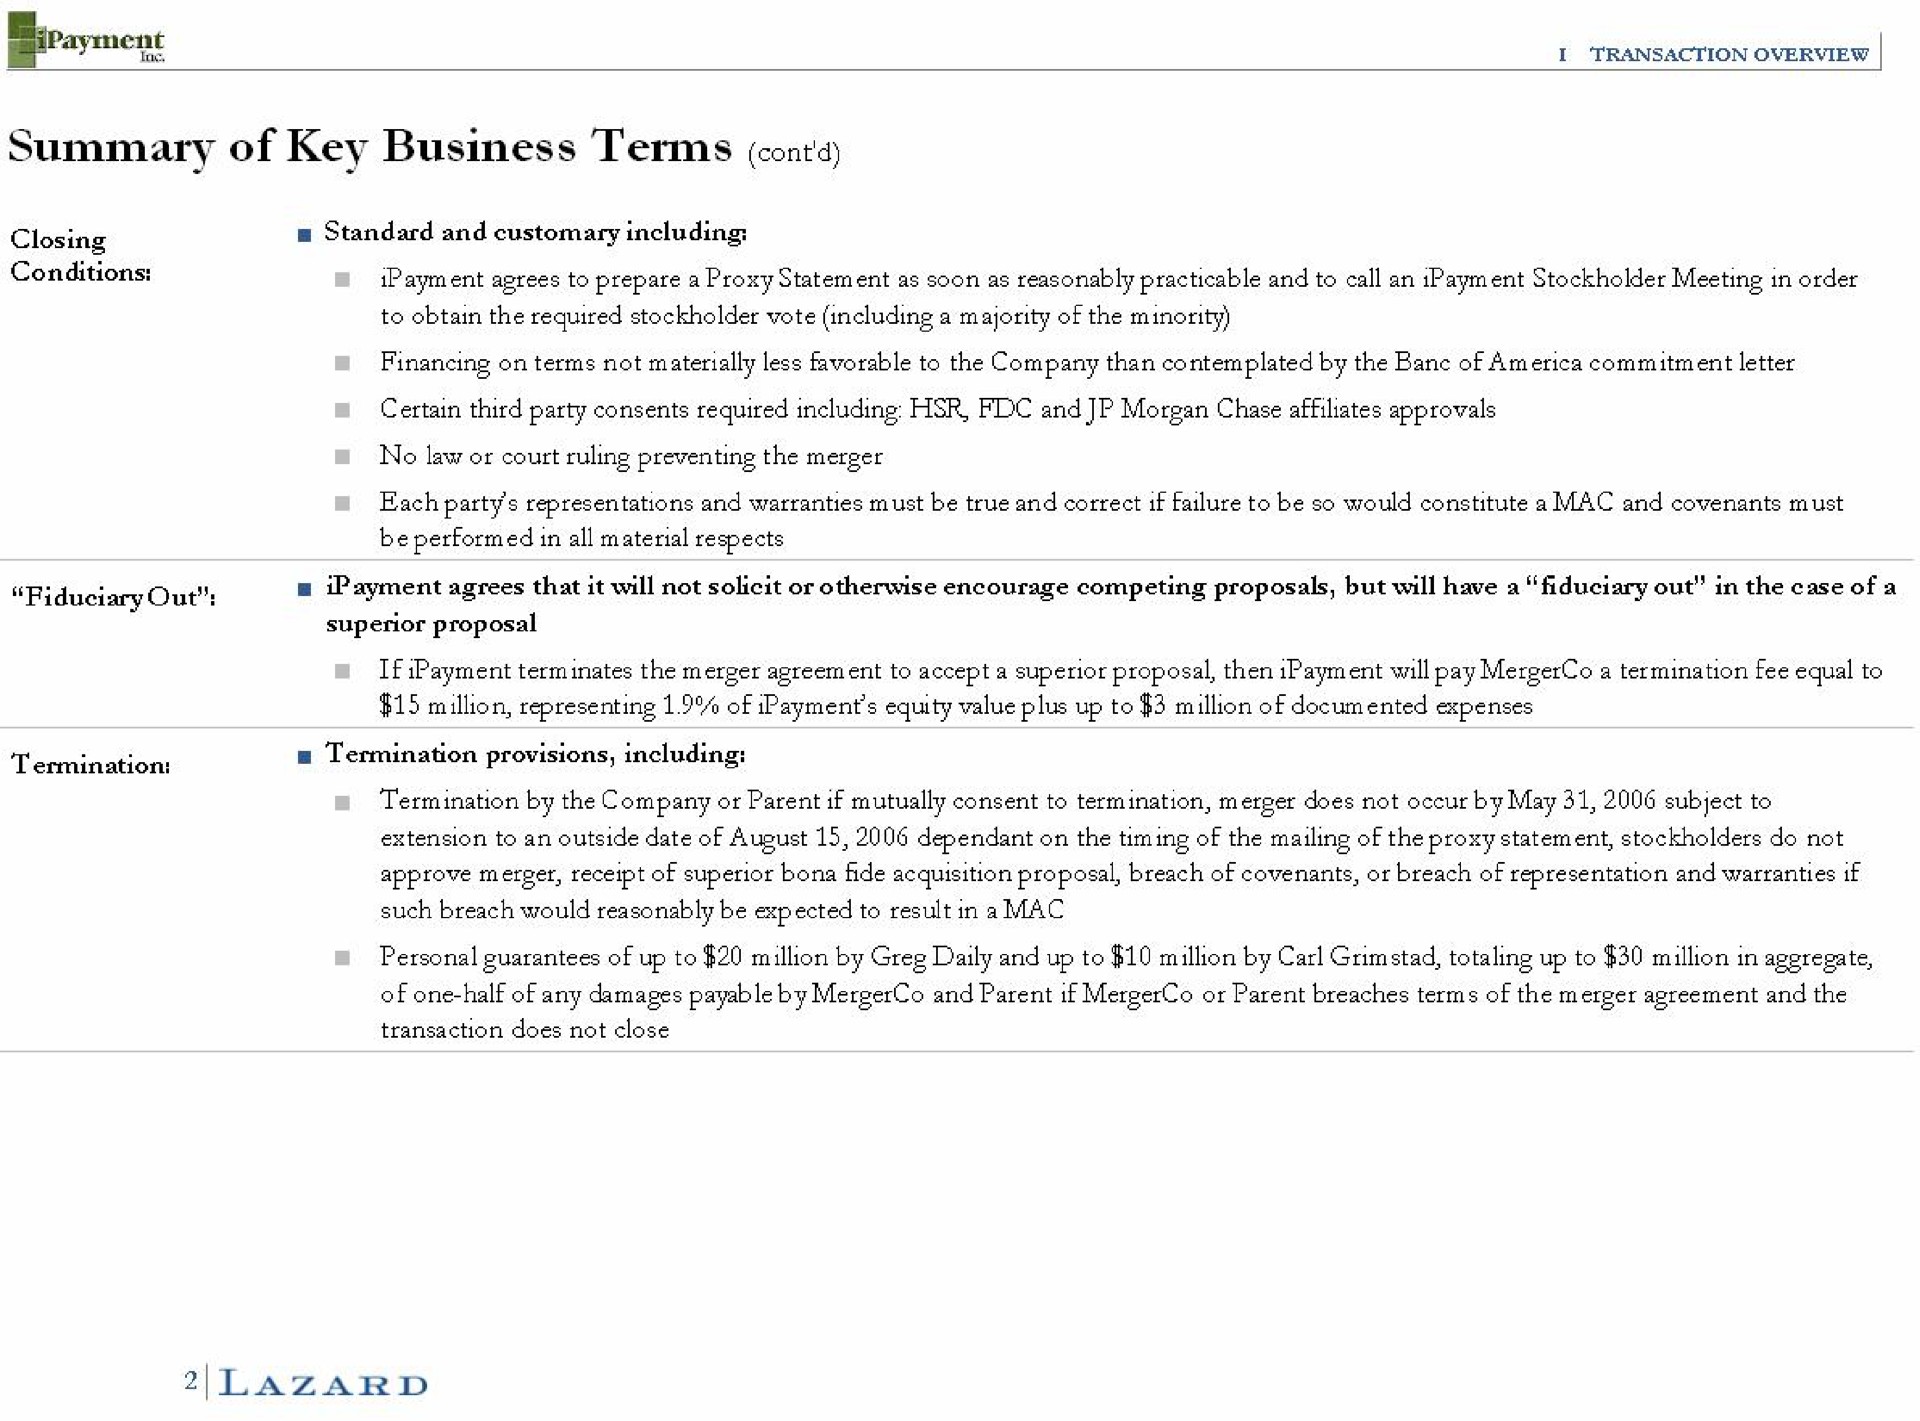 summary of key business terms | Lazard